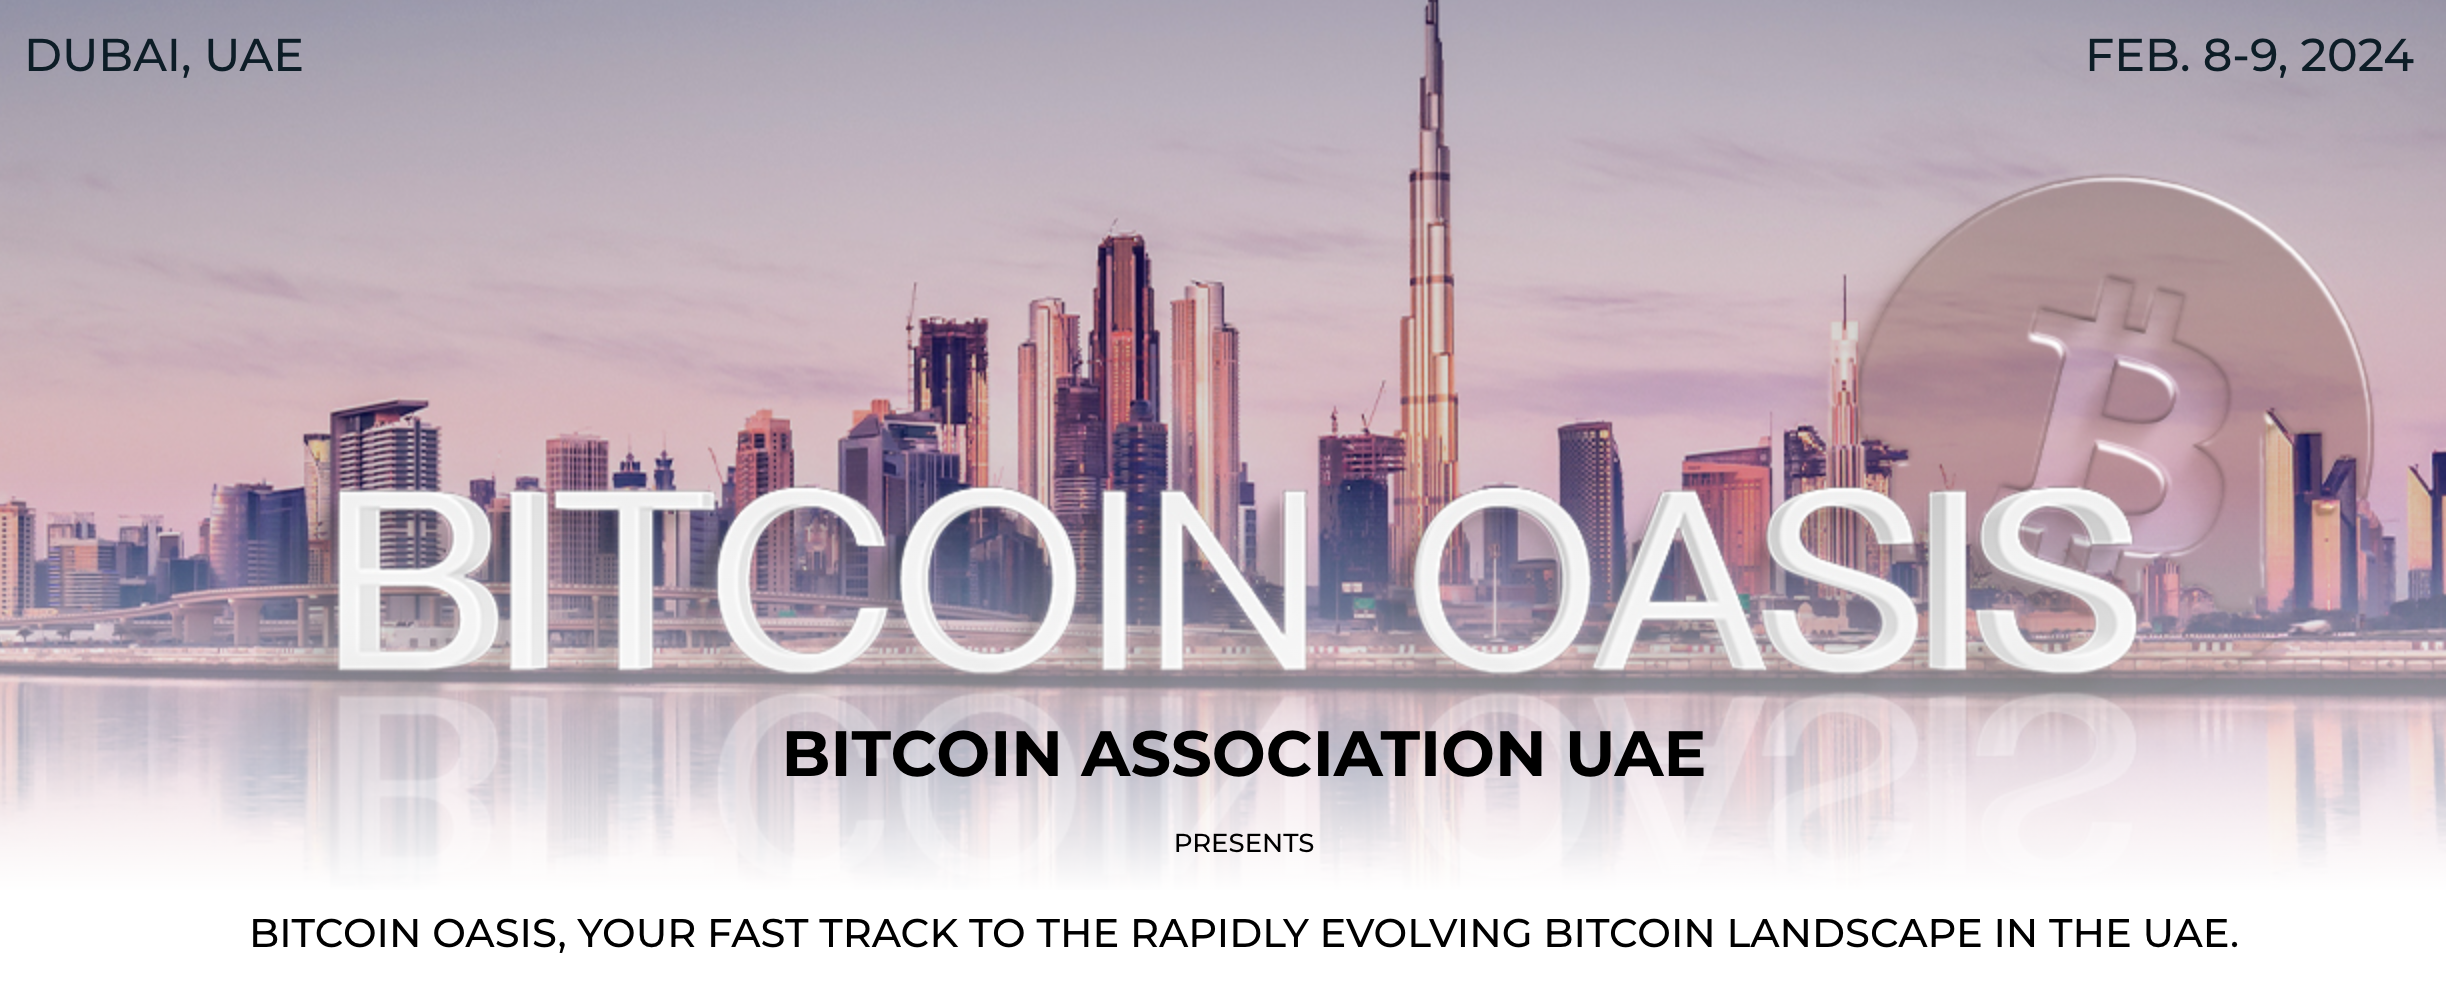 ElenPAY: the payment solution for Dubai’s first Bitcoin event